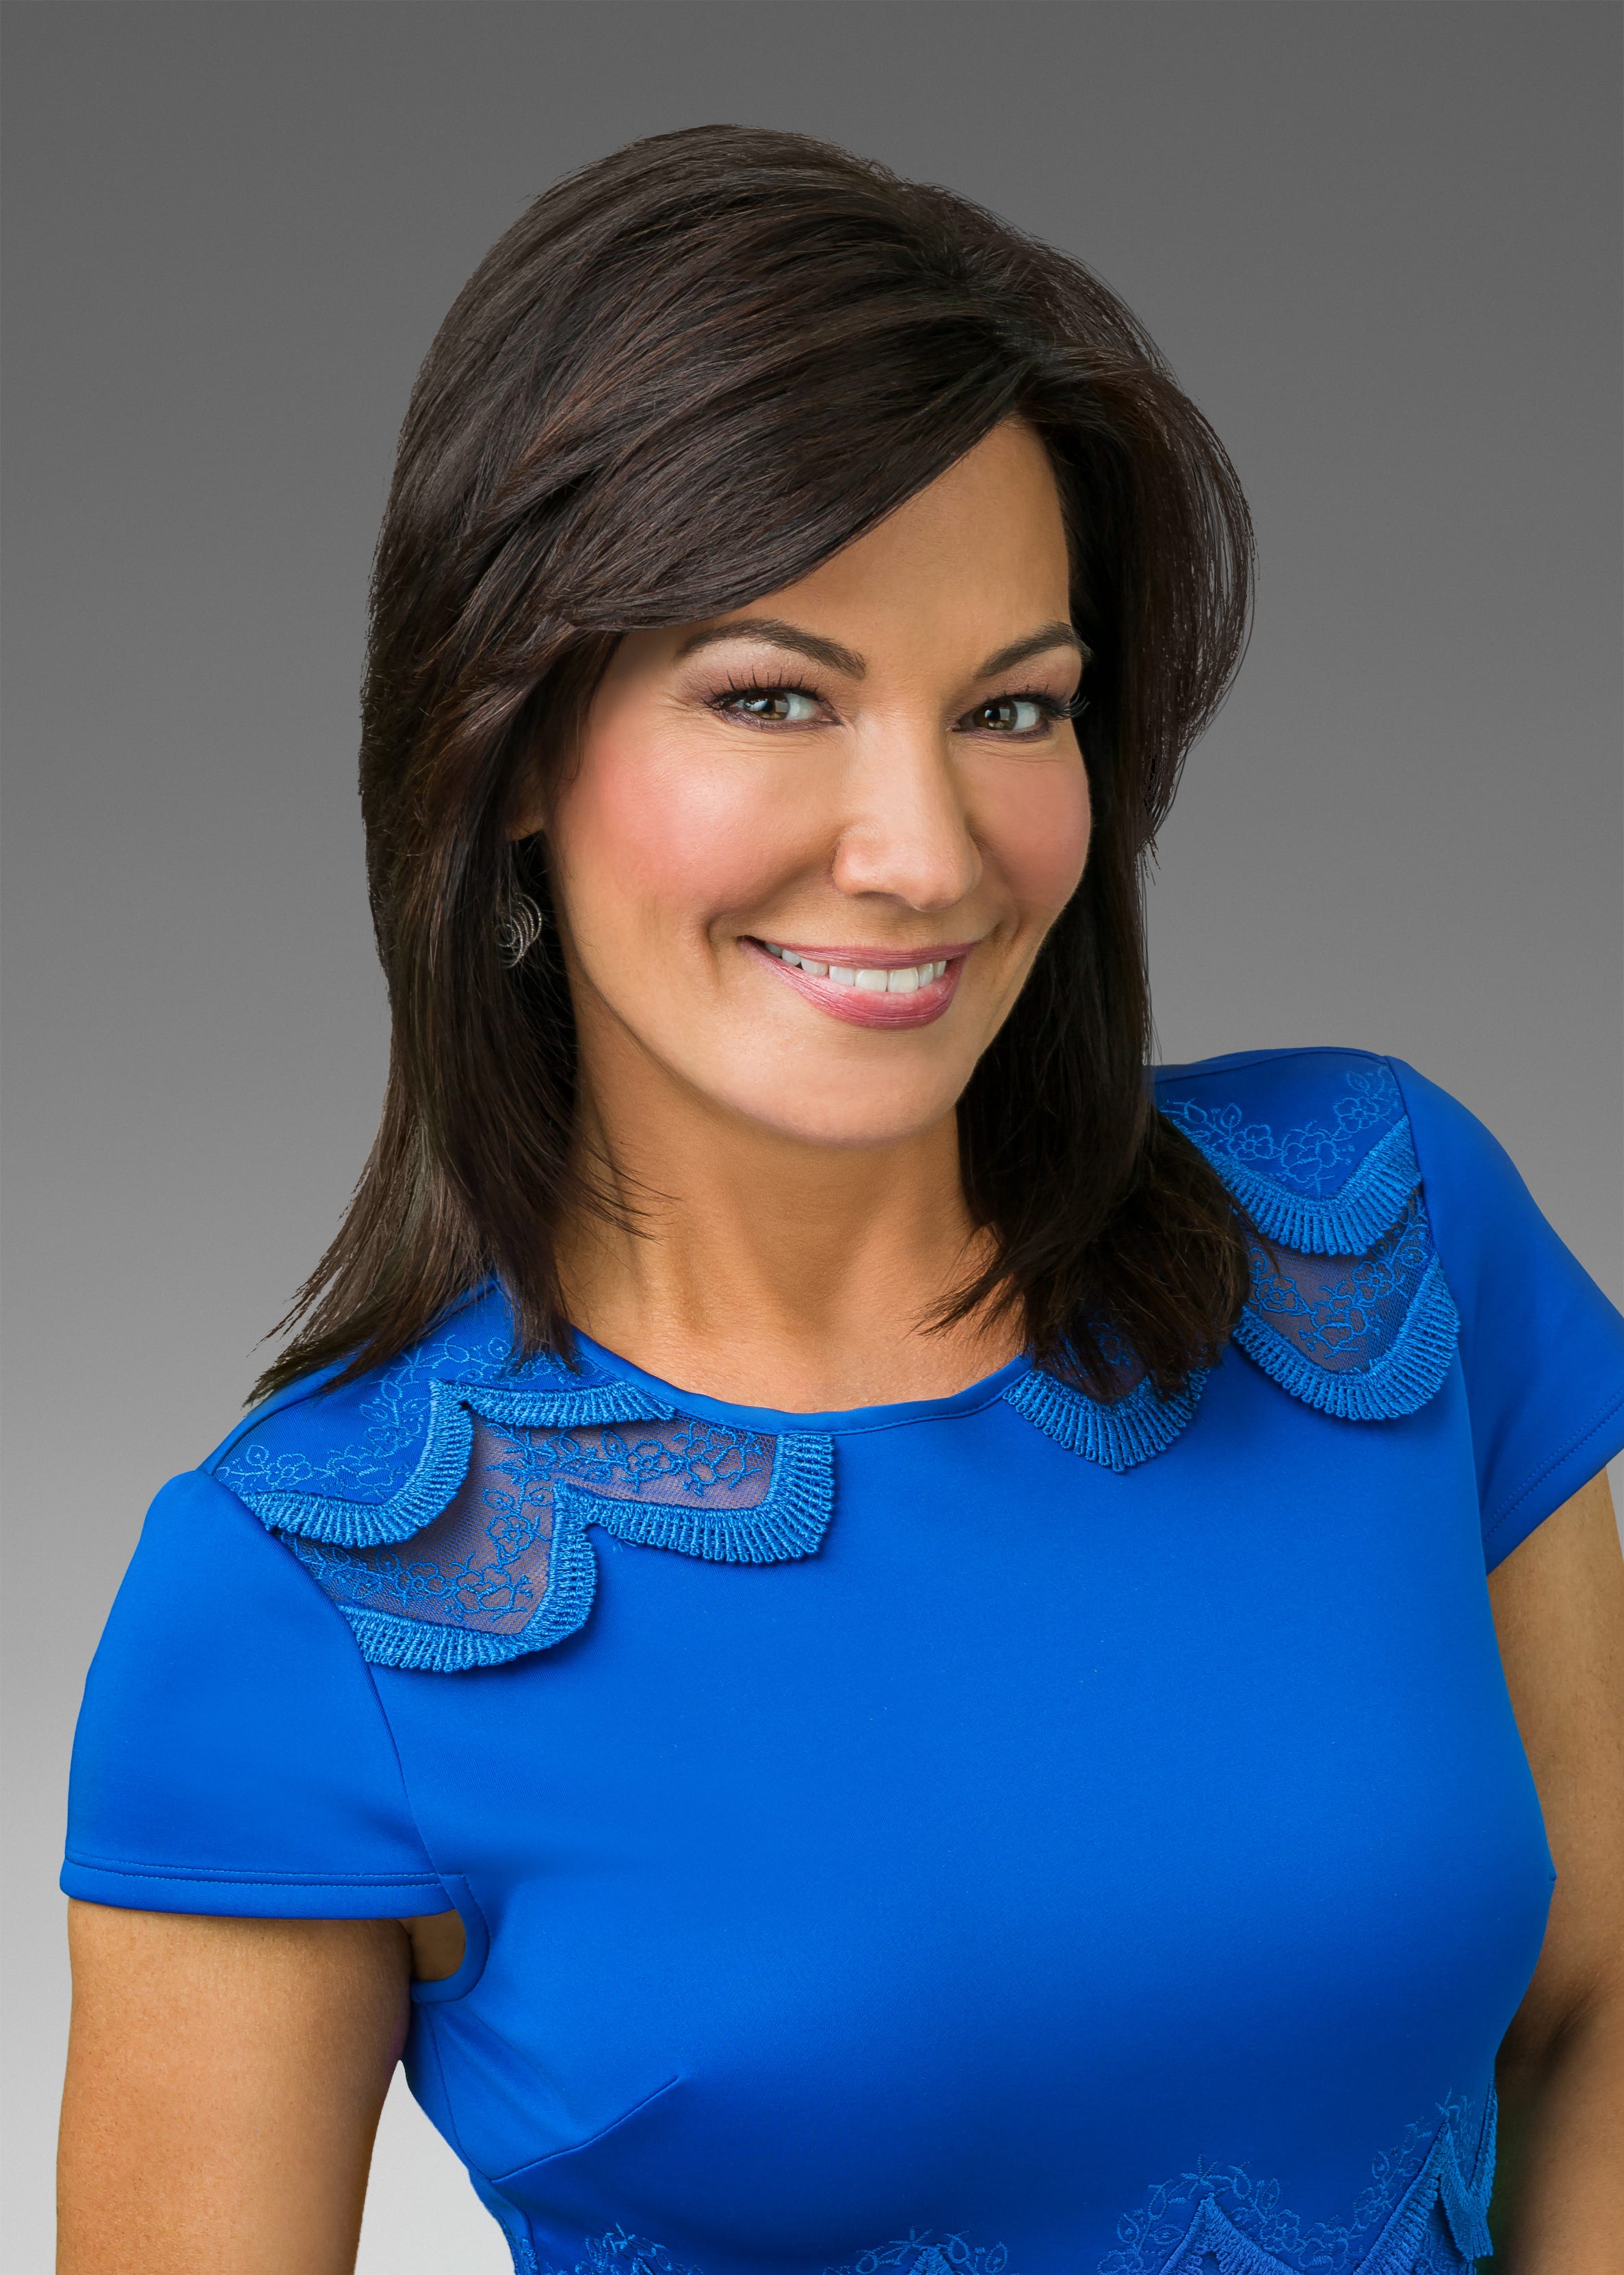 channel 8 news anchor leaving